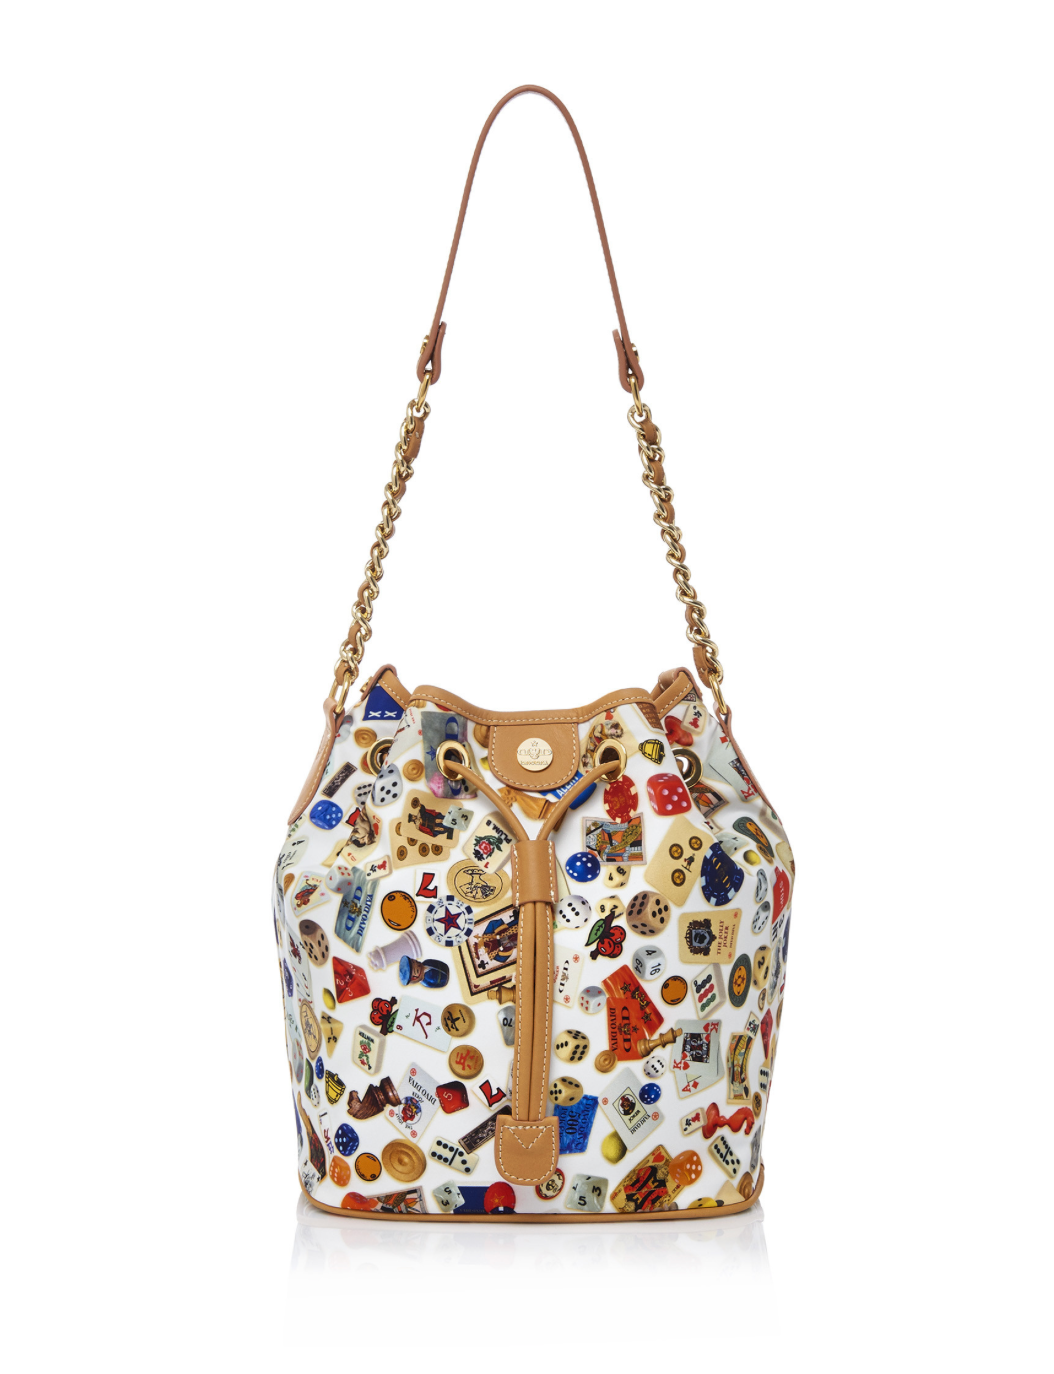 Casablanca Life is a Game White Bucket Bag Made in Italy by Divo Diva New